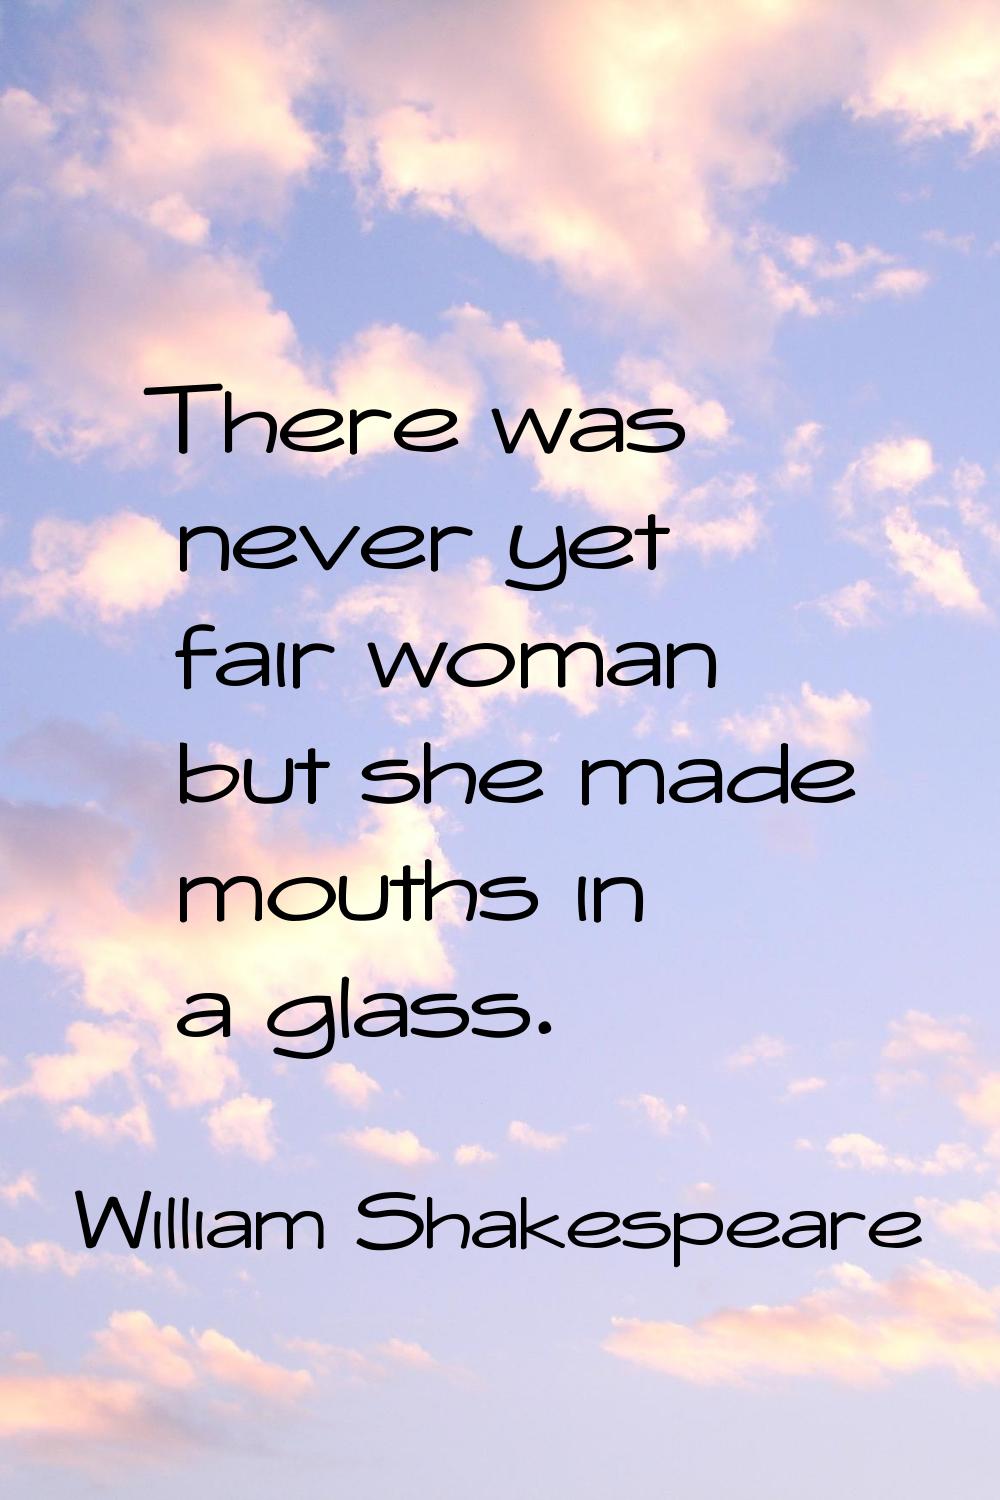 There was never yet fair woman but she made mouths in a glass.